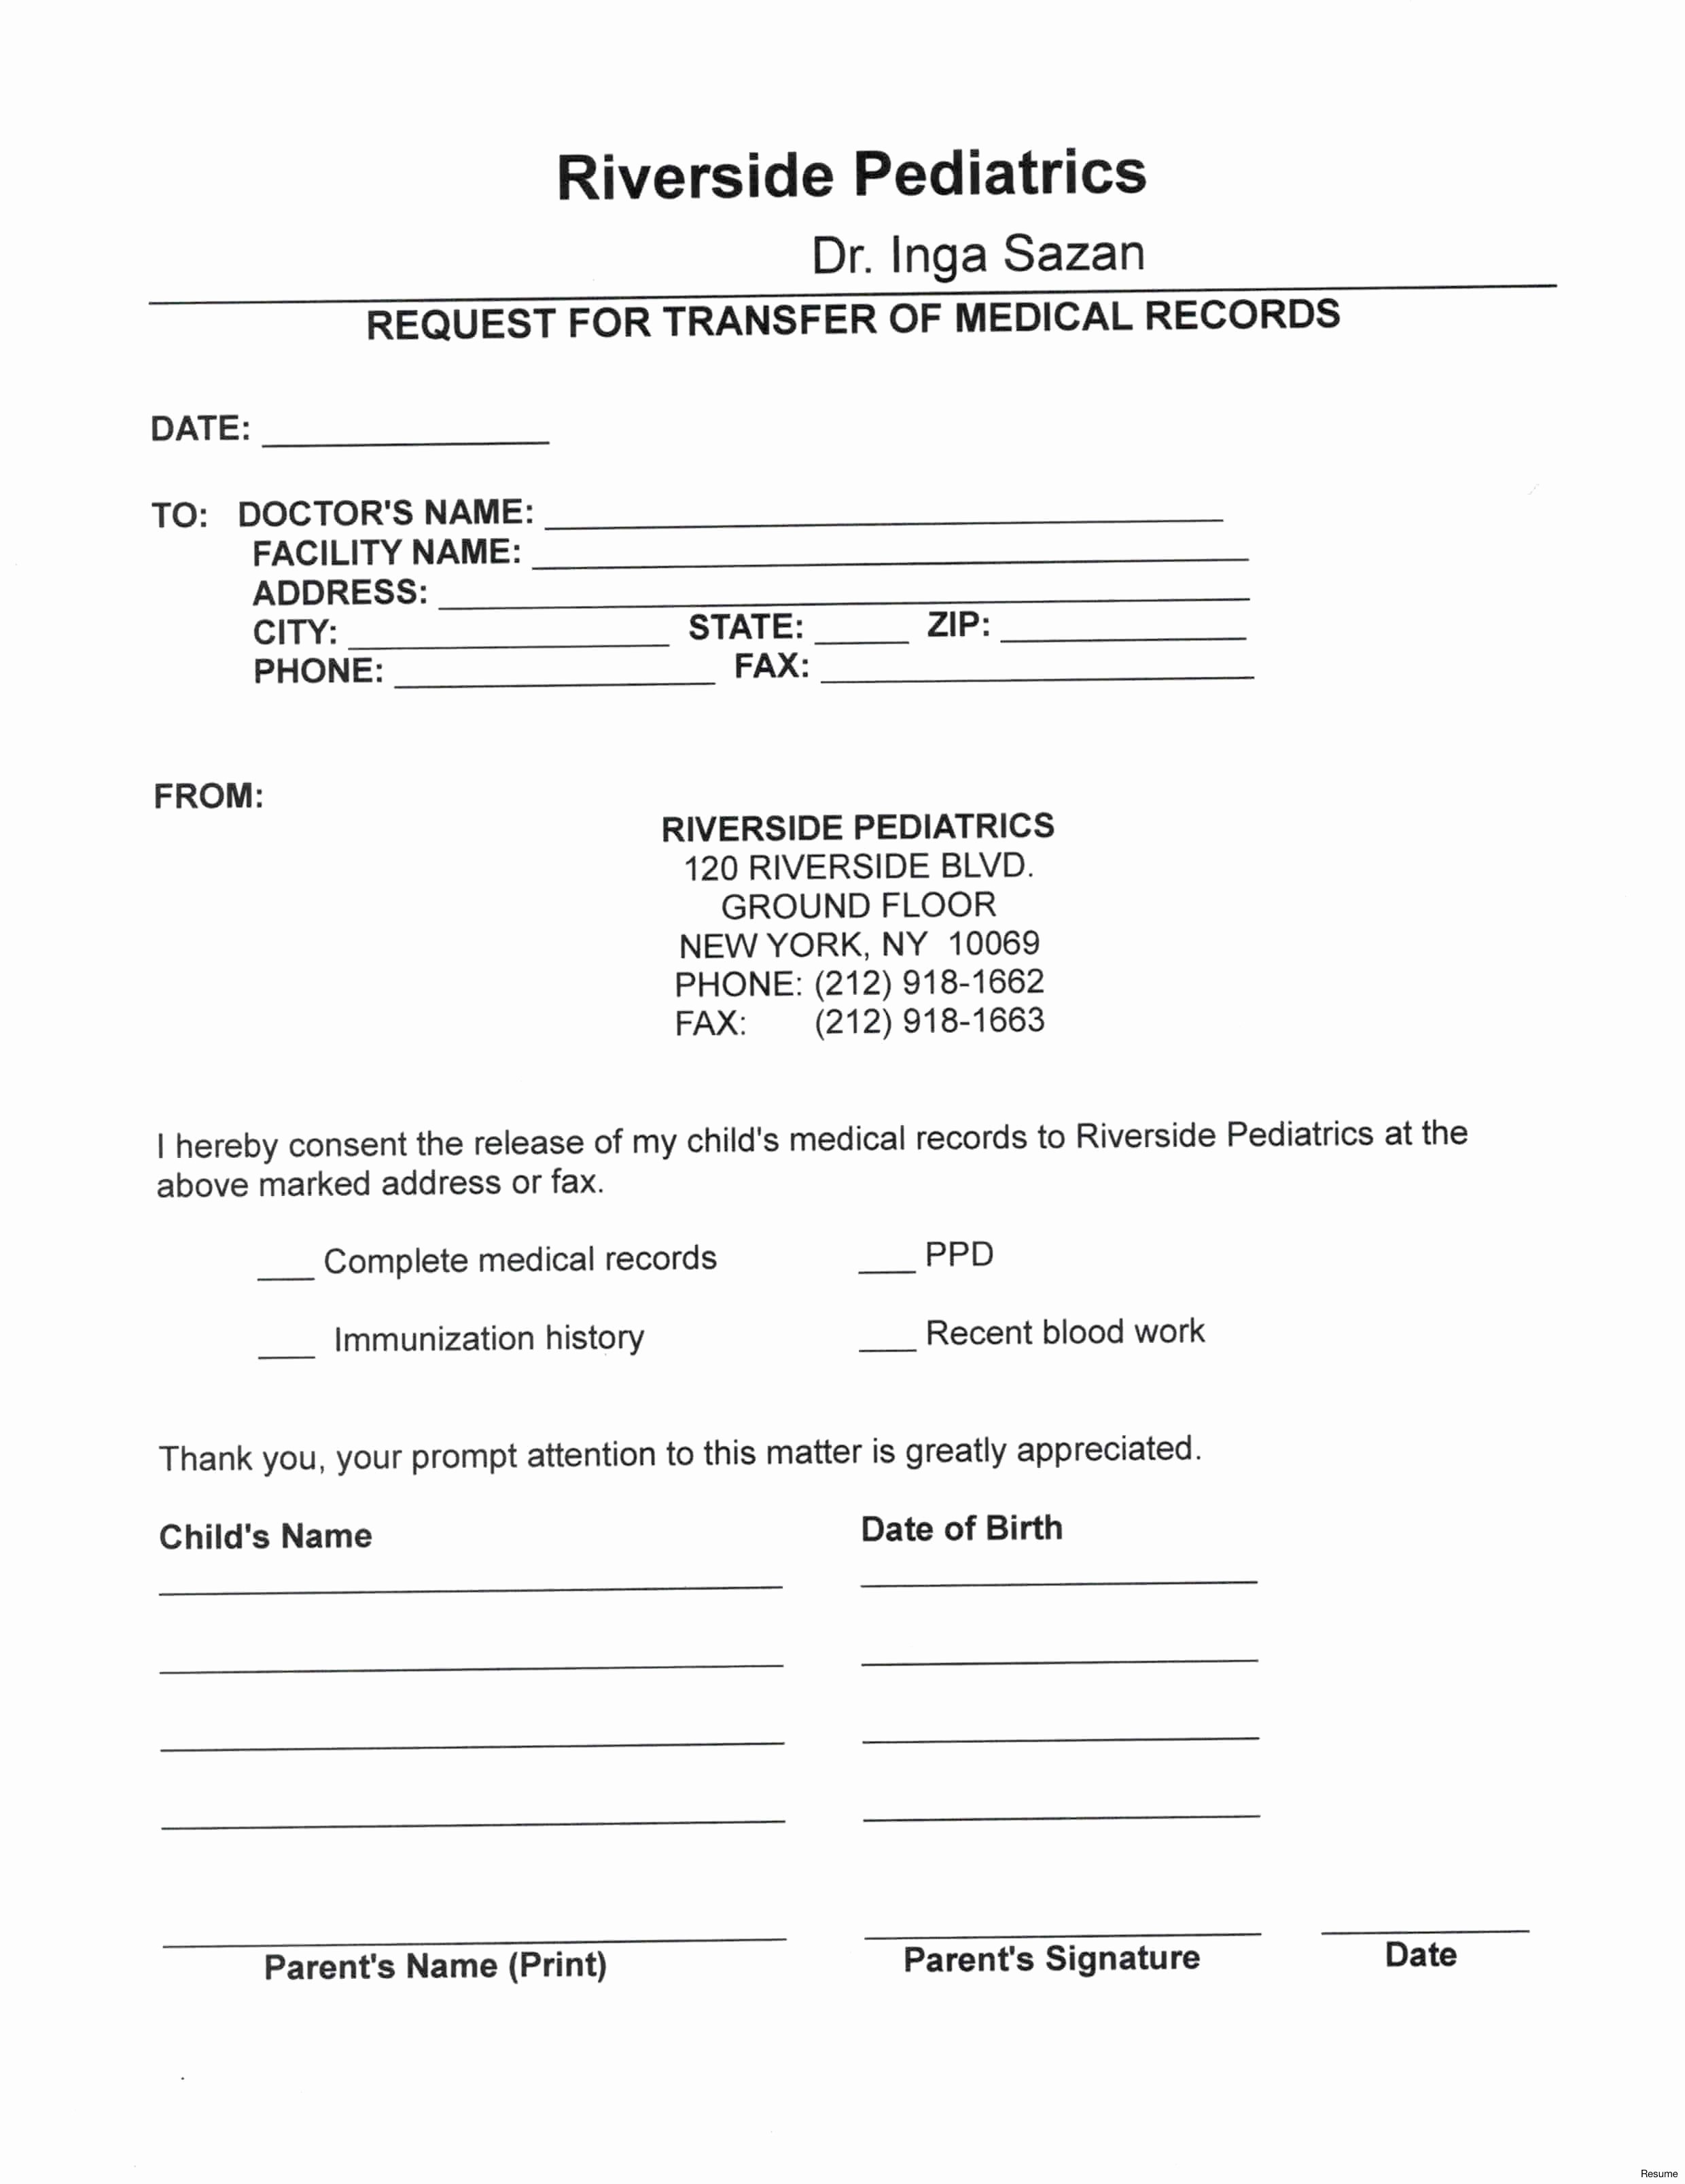 Medical Record forms Template Beautiful Request for Medical Records Template Letter Samples